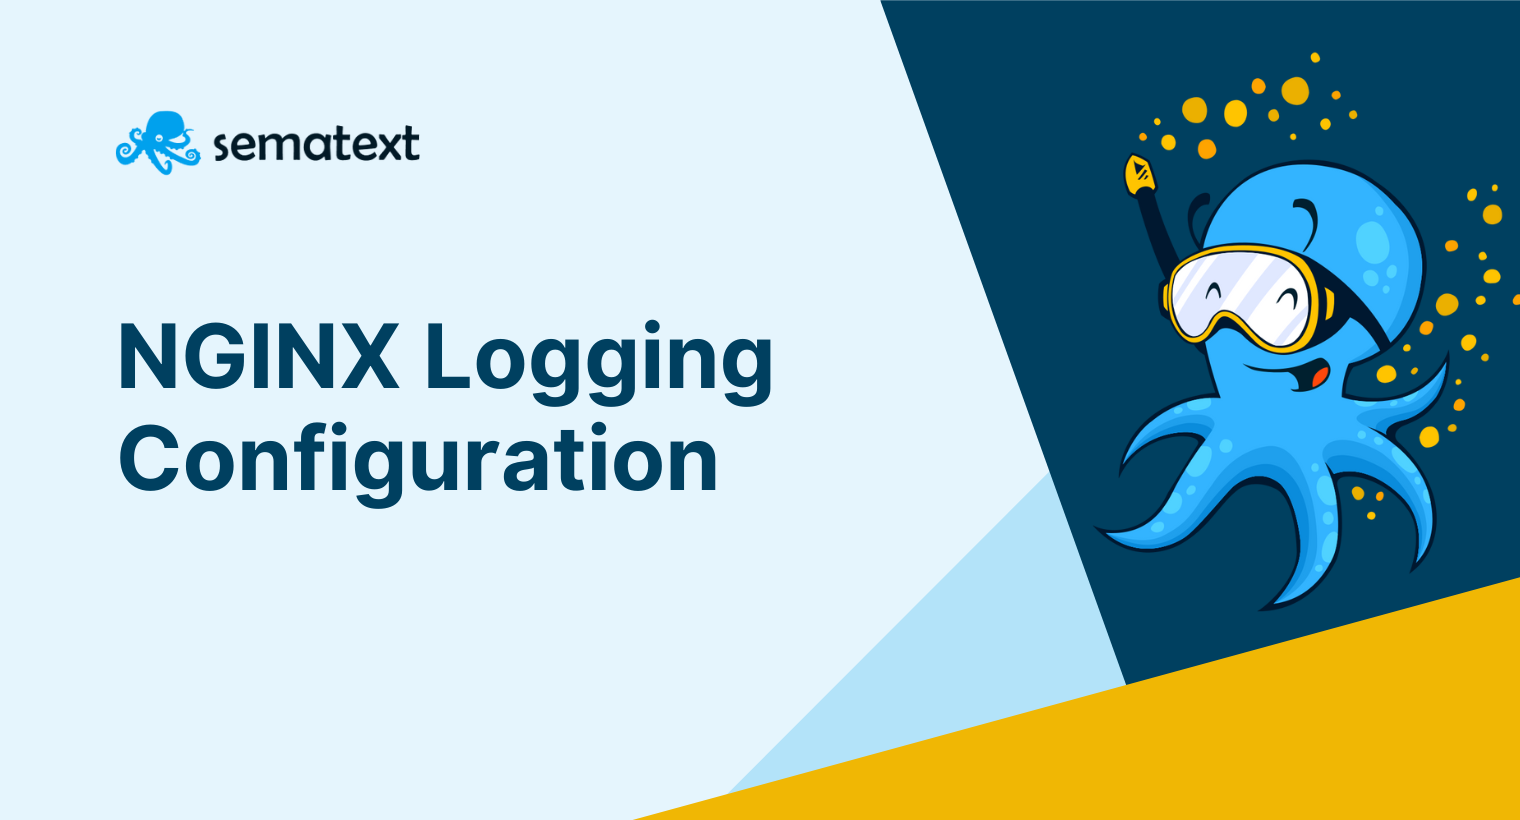 NGINX Logging Configuration: How to View and Analyze Access and Error Logs